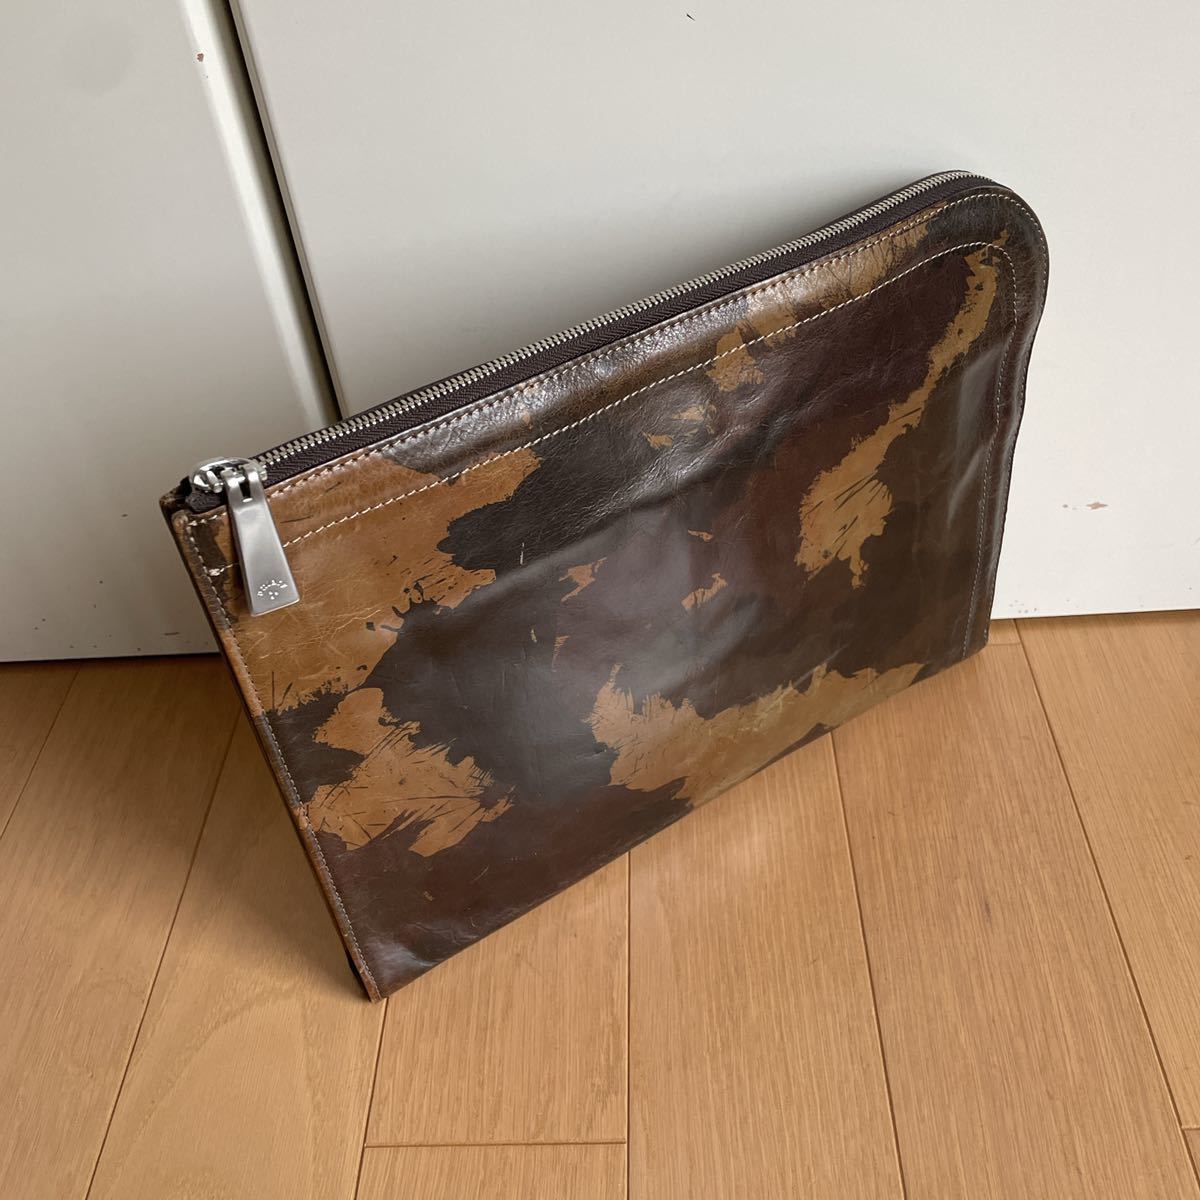 ani have aniary IML clutch bag 09-08000 camouflage used 